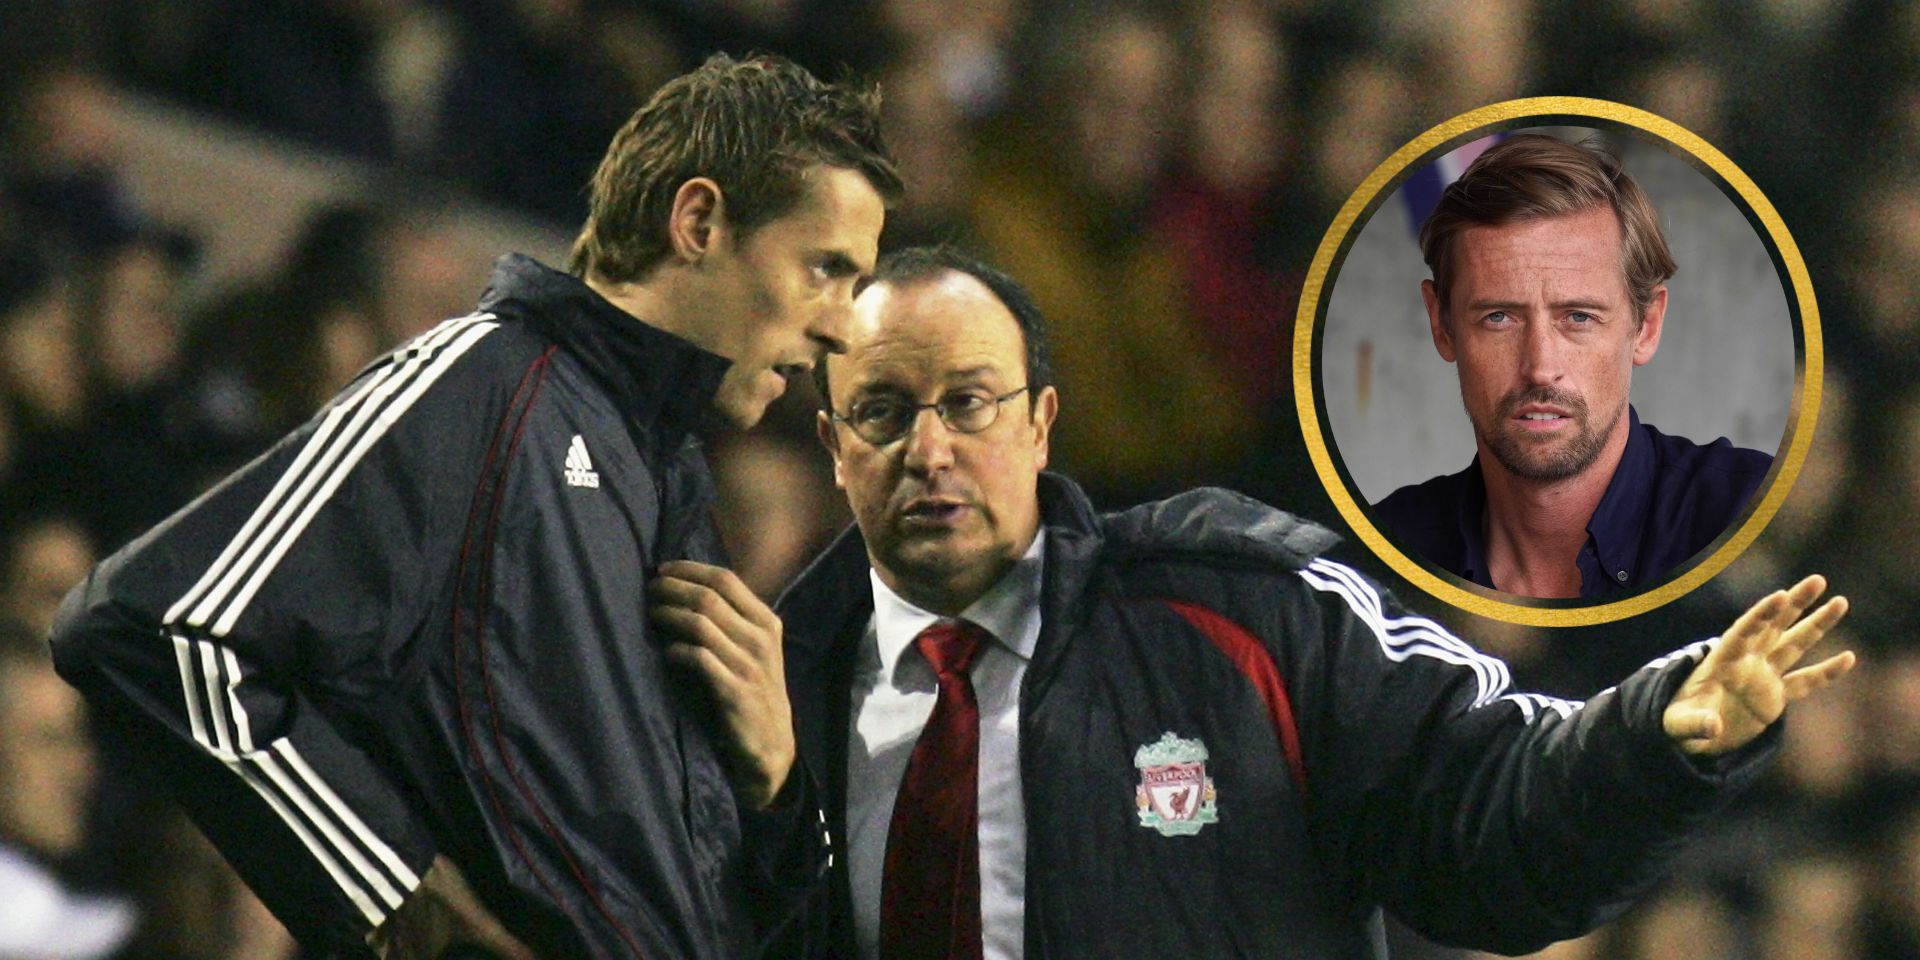 Peter Crouch says Rafa Benitez “wasn’t very good” at one aspect of managing after resting him following England goals